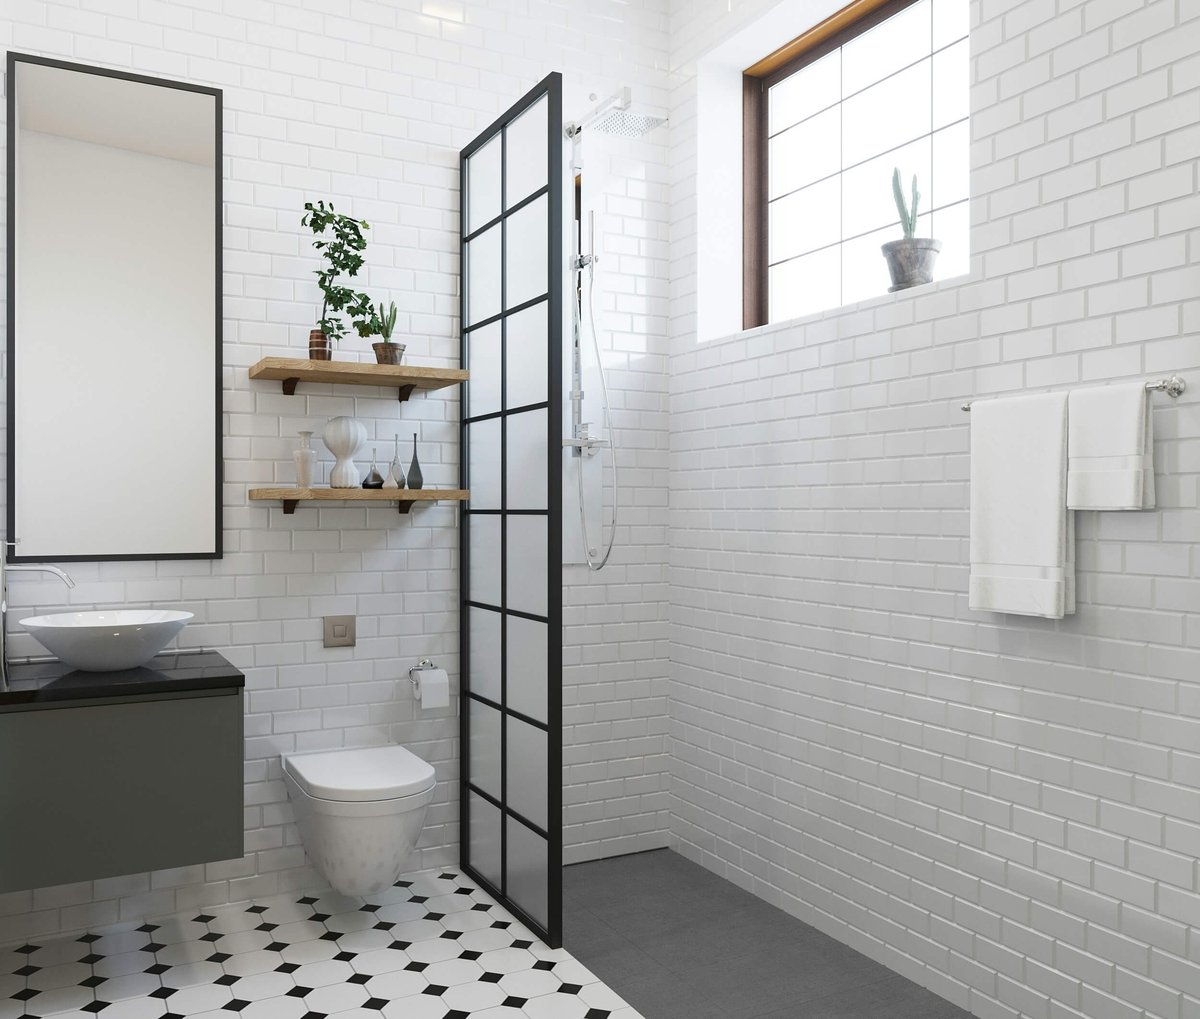 Transform Your Bathroom with these 20+ Stunning CAD Drawings for Renovation Ideas